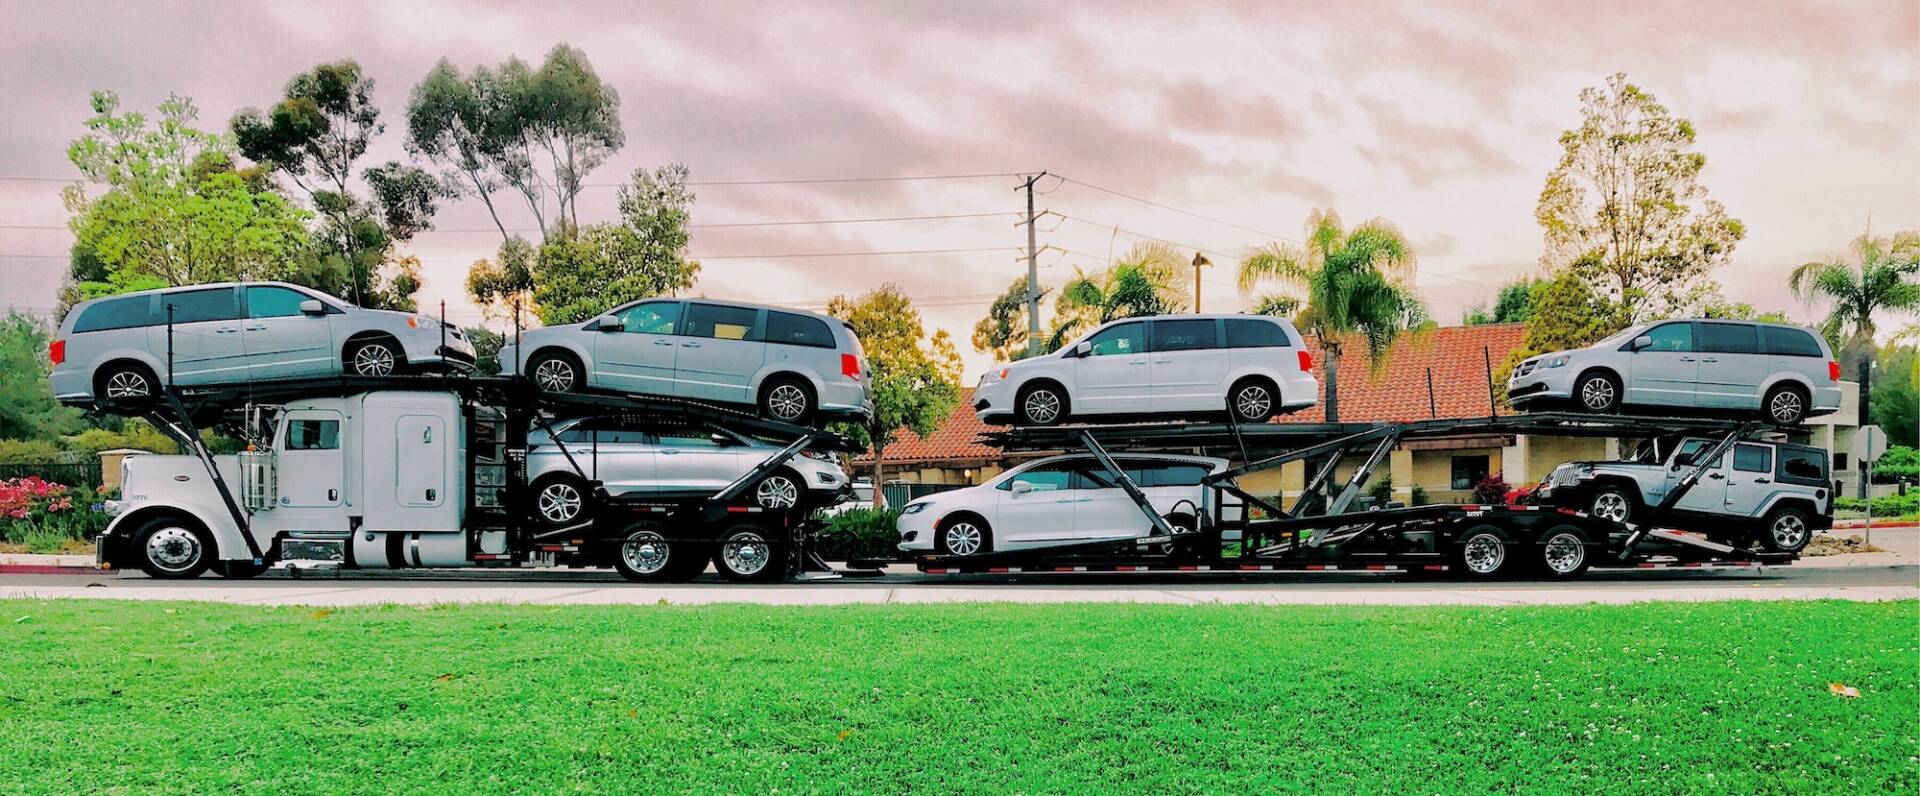 NOMINATED Car carrier auto transport truck filled with cars ready for a cross country road trip